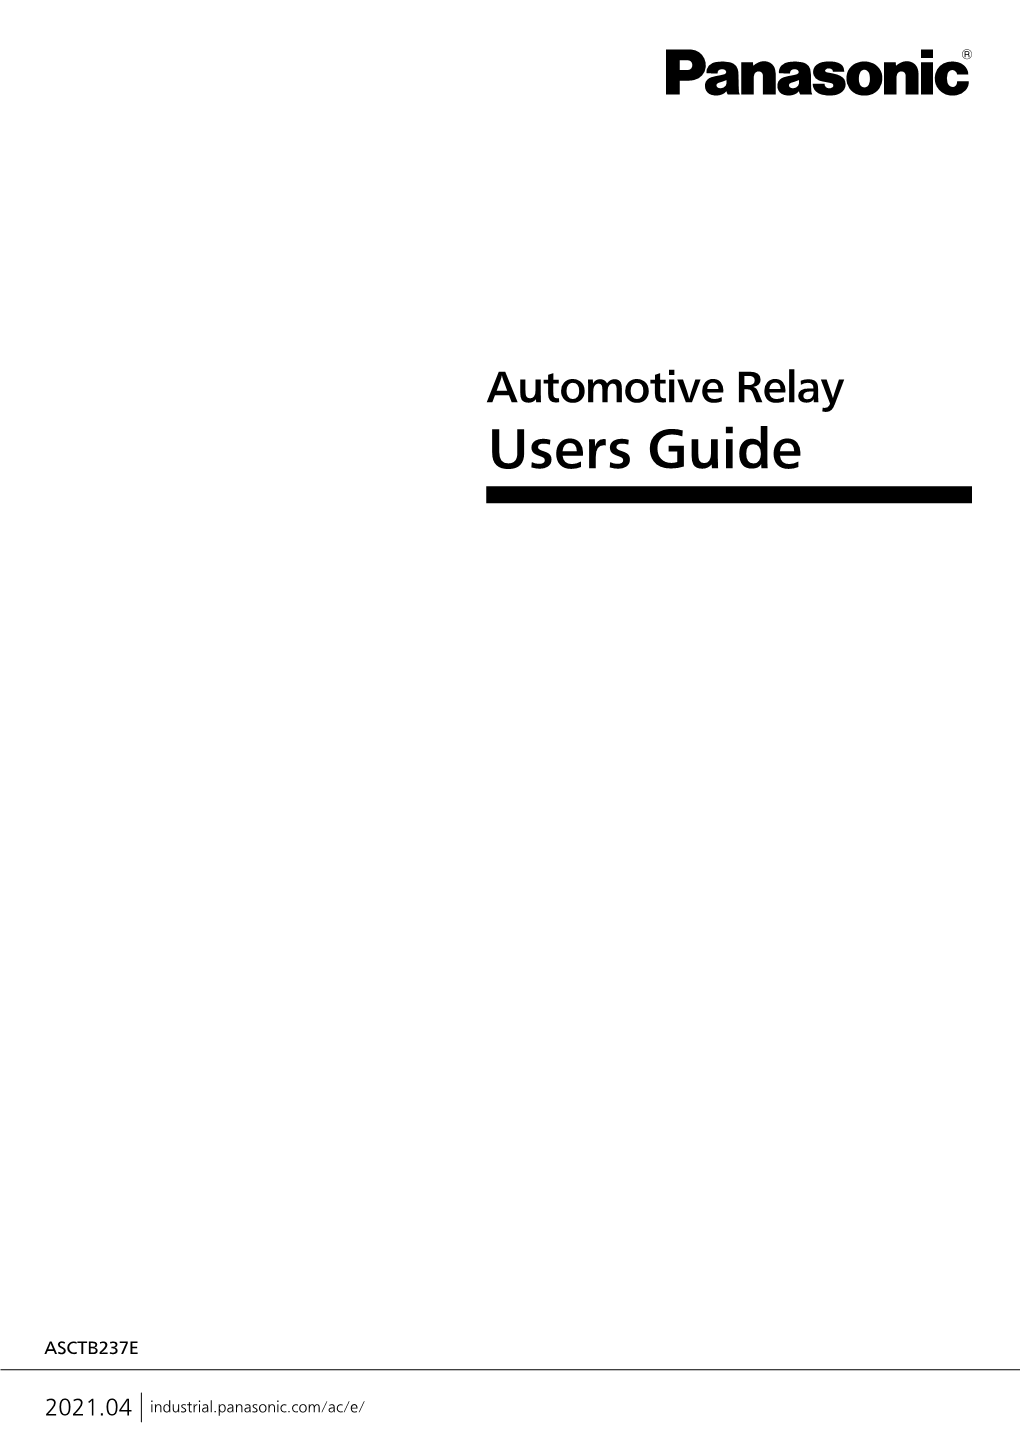 Automotive Relay Users Guide